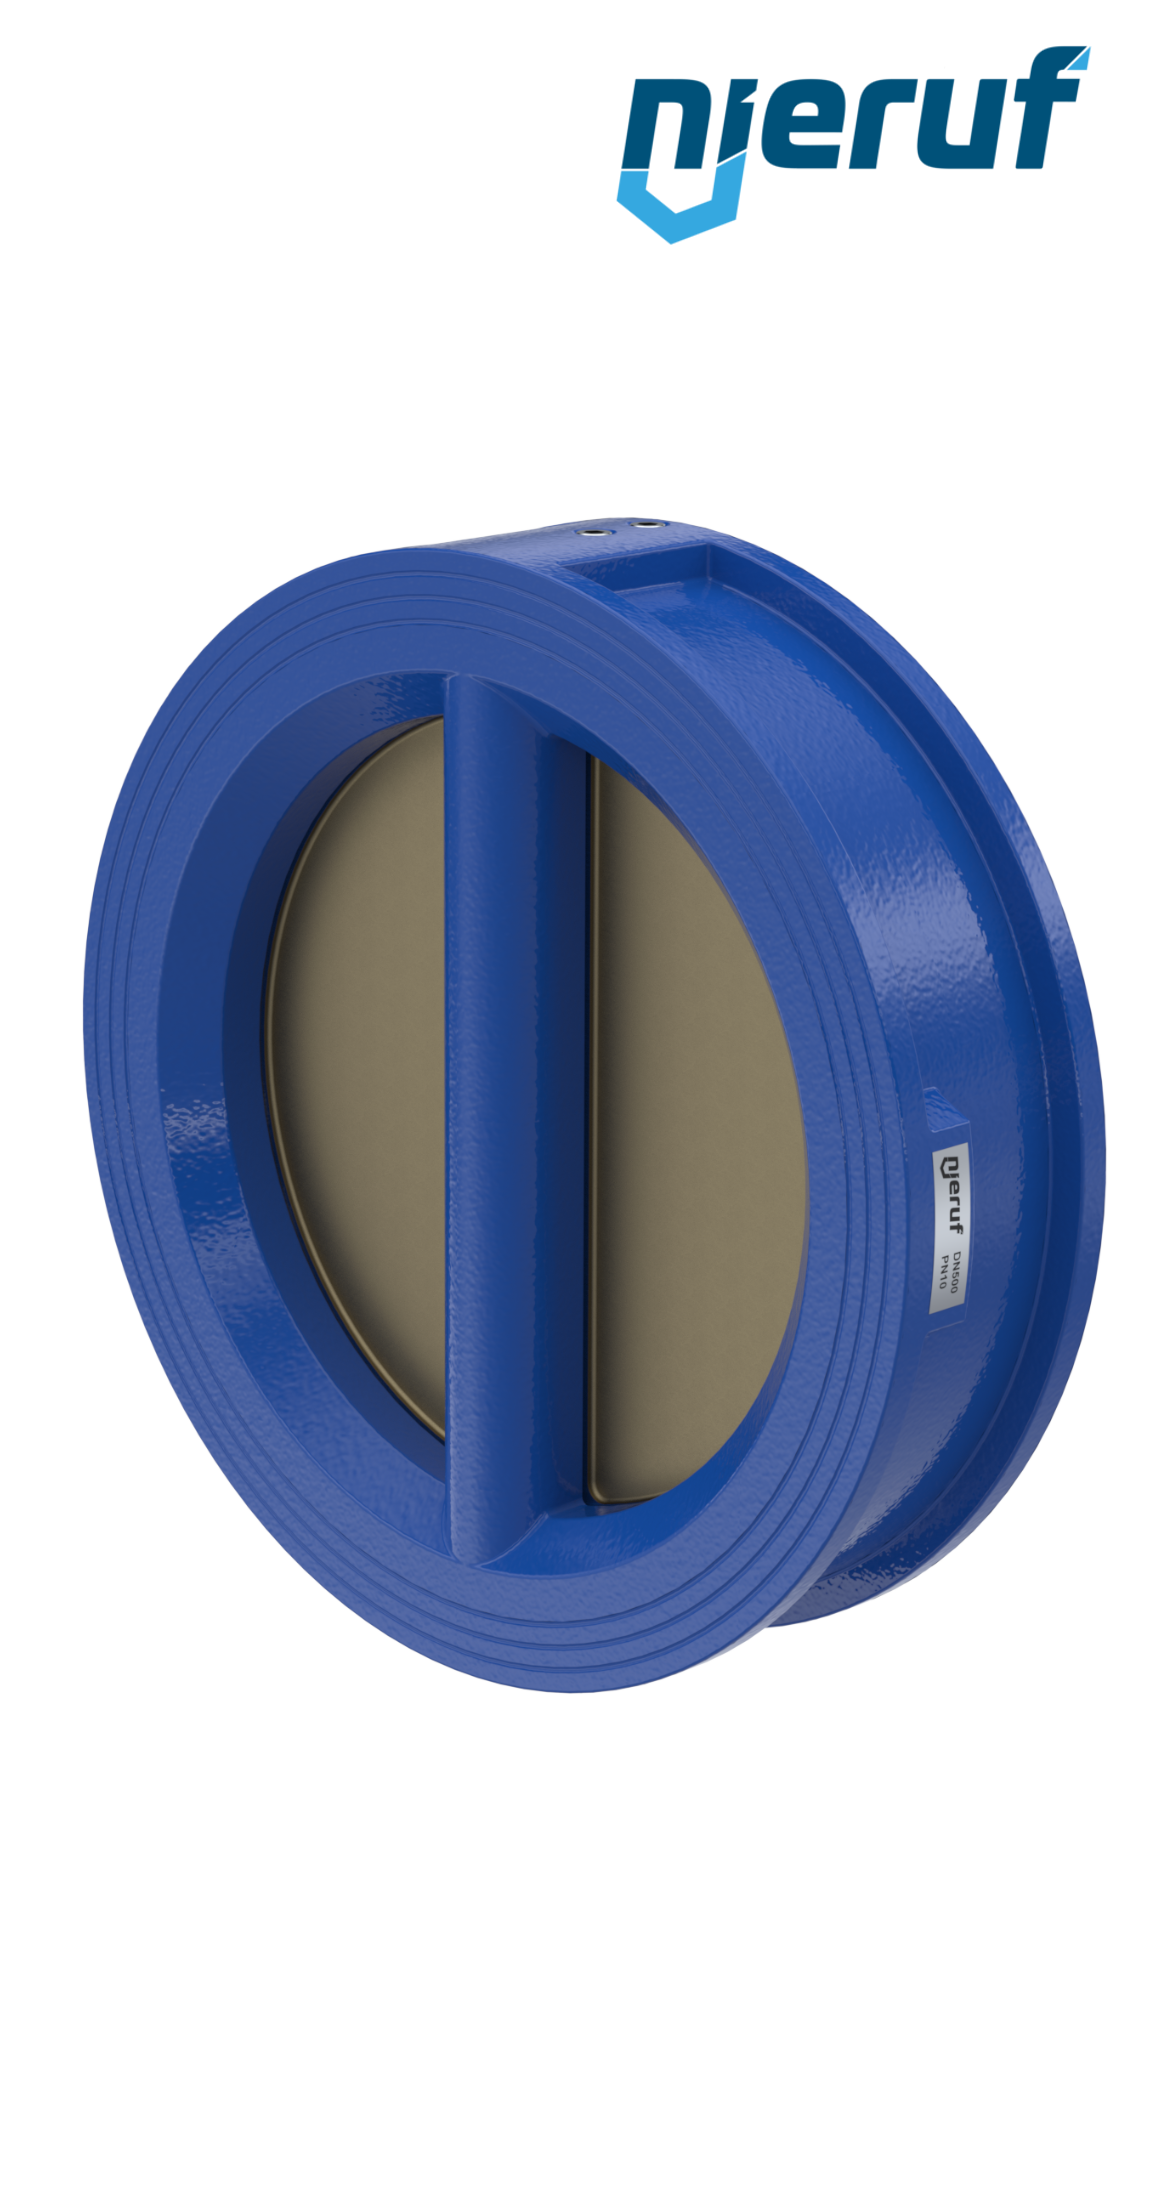 dual plate check valve DN500 DR04 GGG40 epoxyd plated blue 180µm EPDM